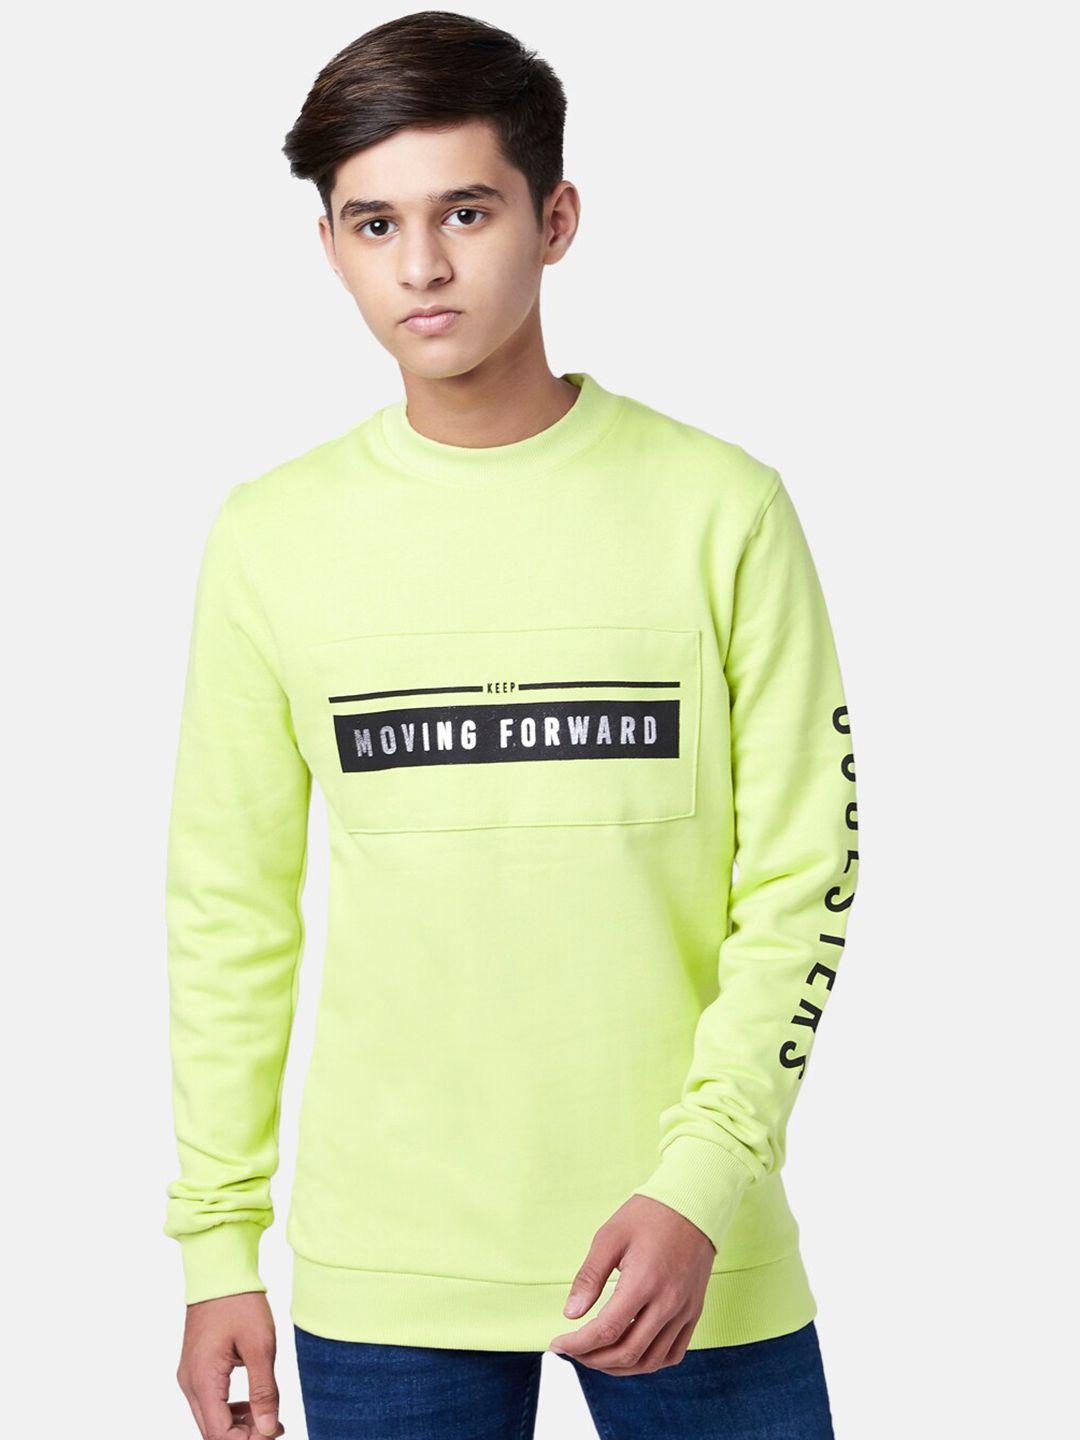 coolsters by pantaloons boys lime green printed cotton sweatshirt